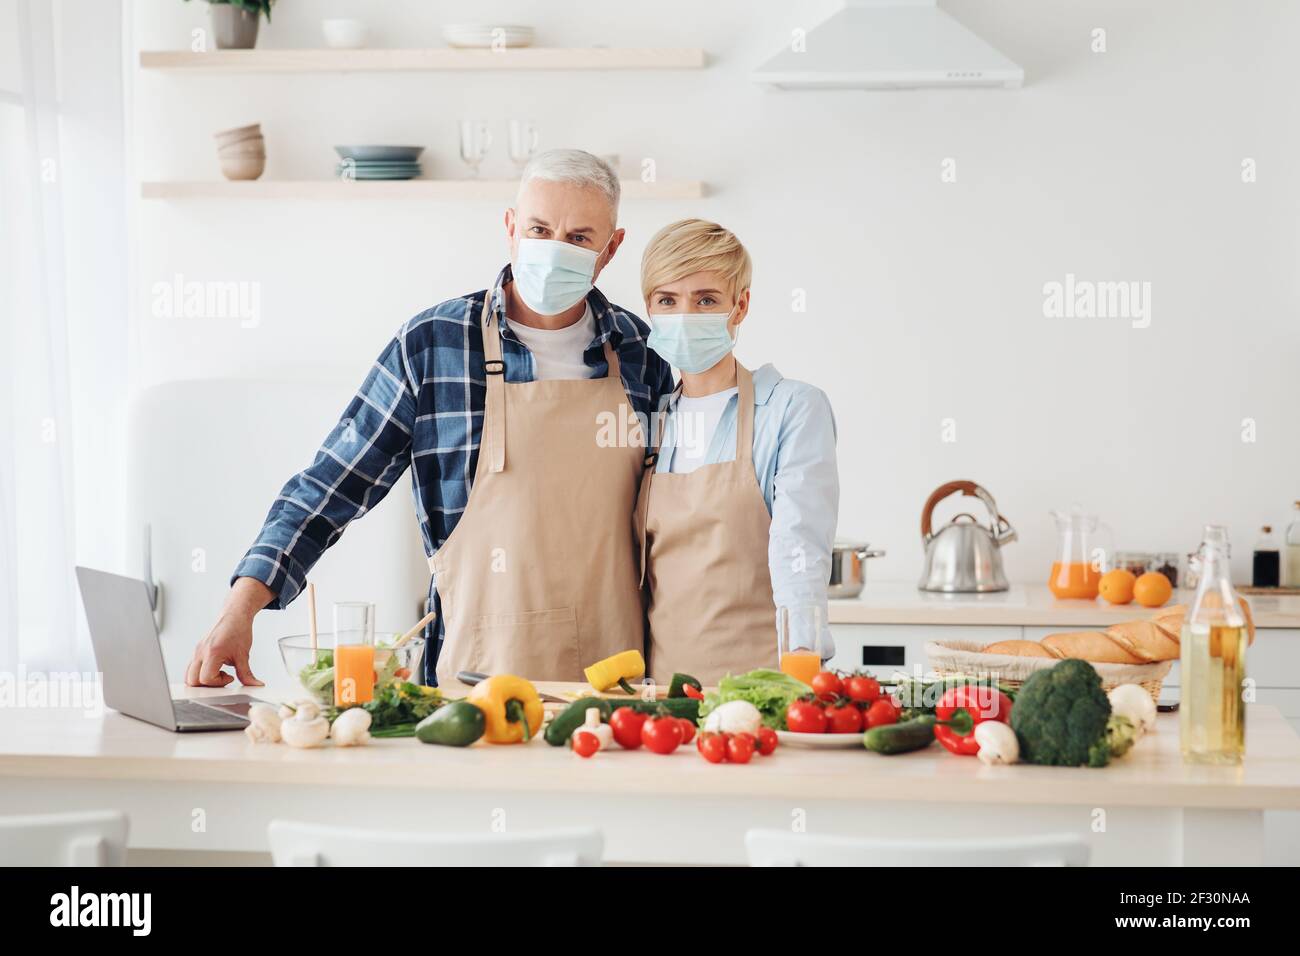 Covid-19 pandemic, healthy food blog and new recipes at home Stock Photo